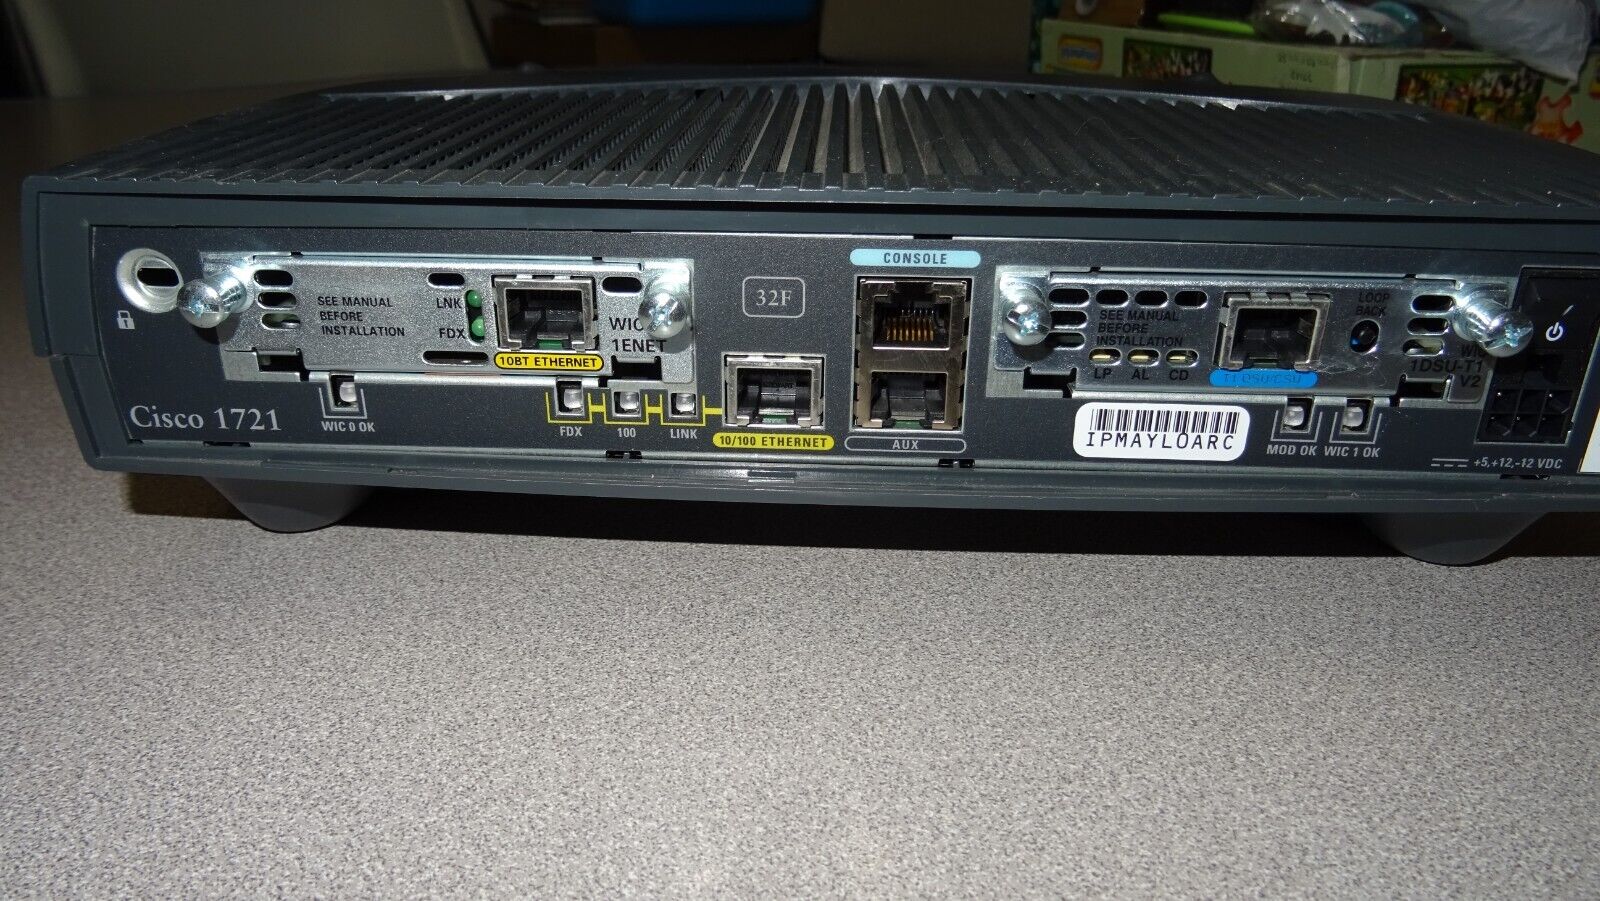 Cisco 1721 modular access  Router with WIC-1ENET & WIC-1DSU-T1 V2 cards